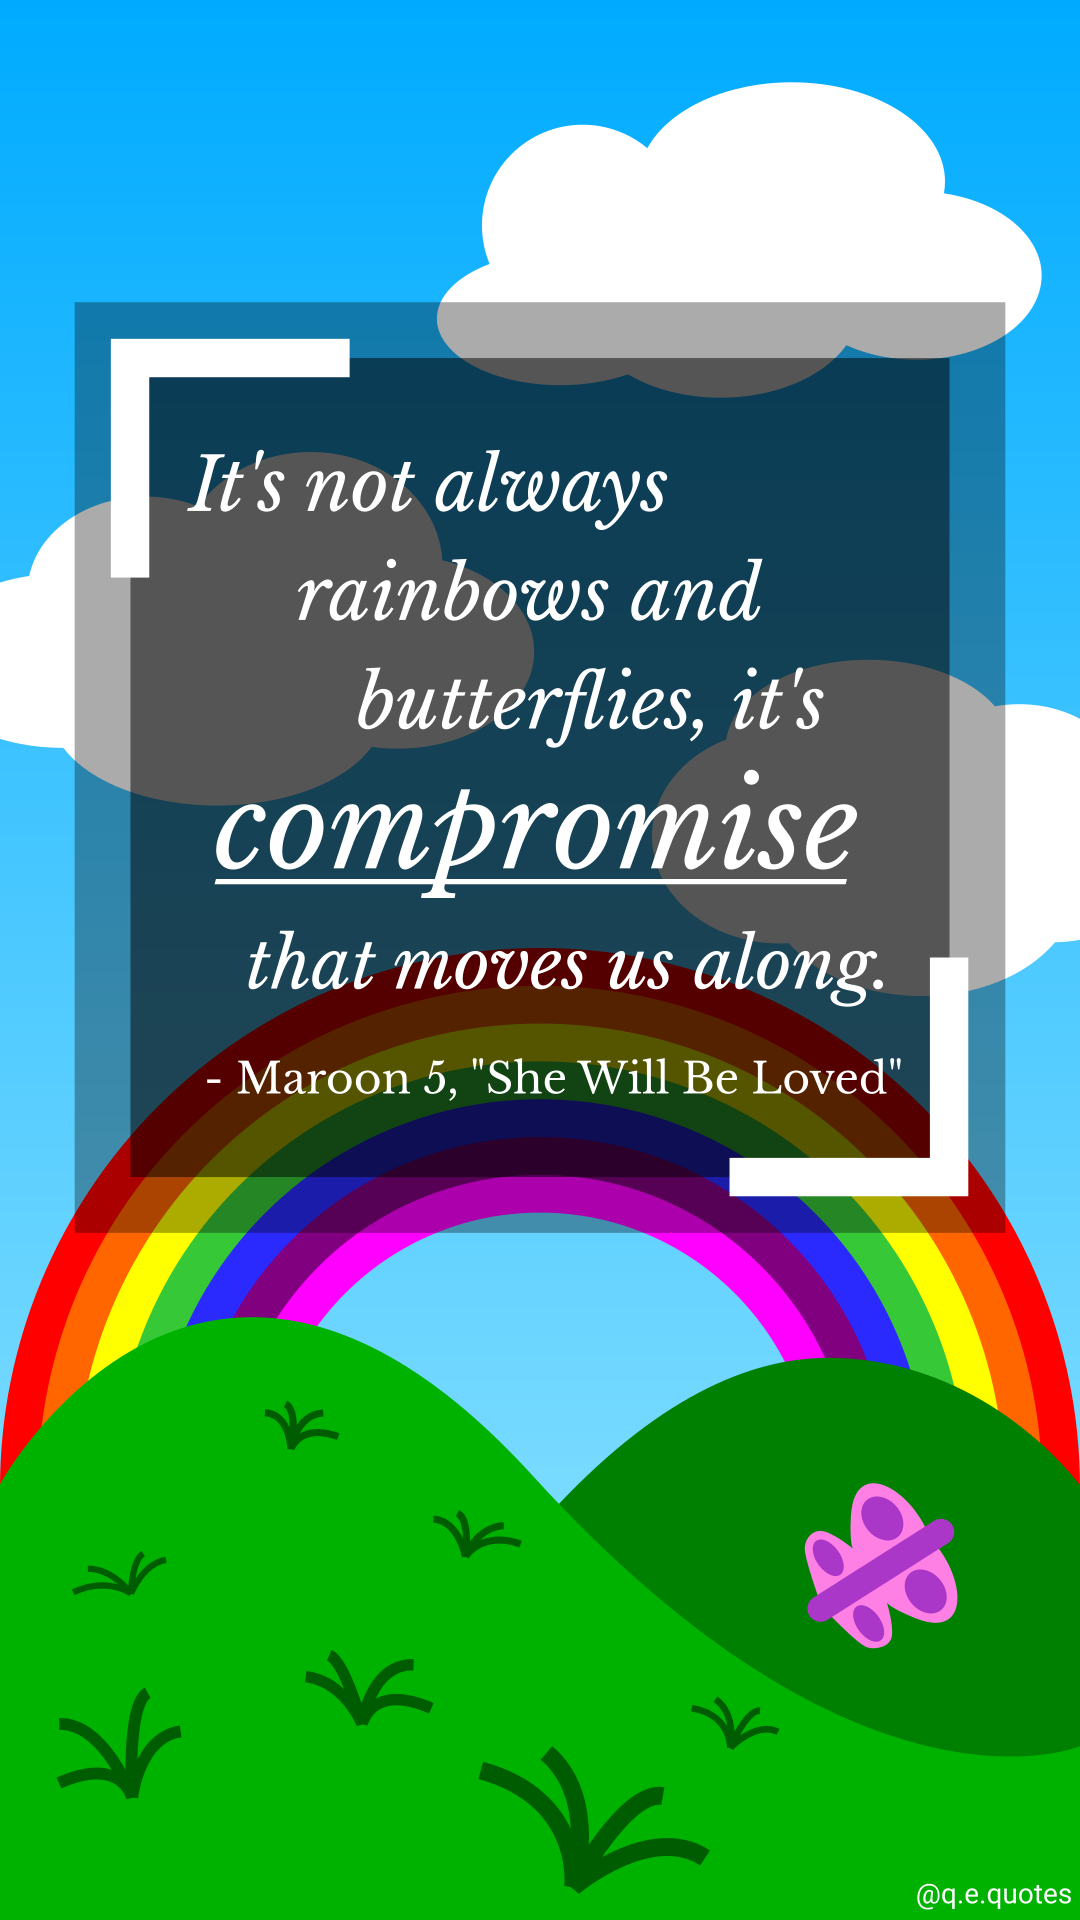 It's not always rainbows and butterflies, it's compromise that moves us along.